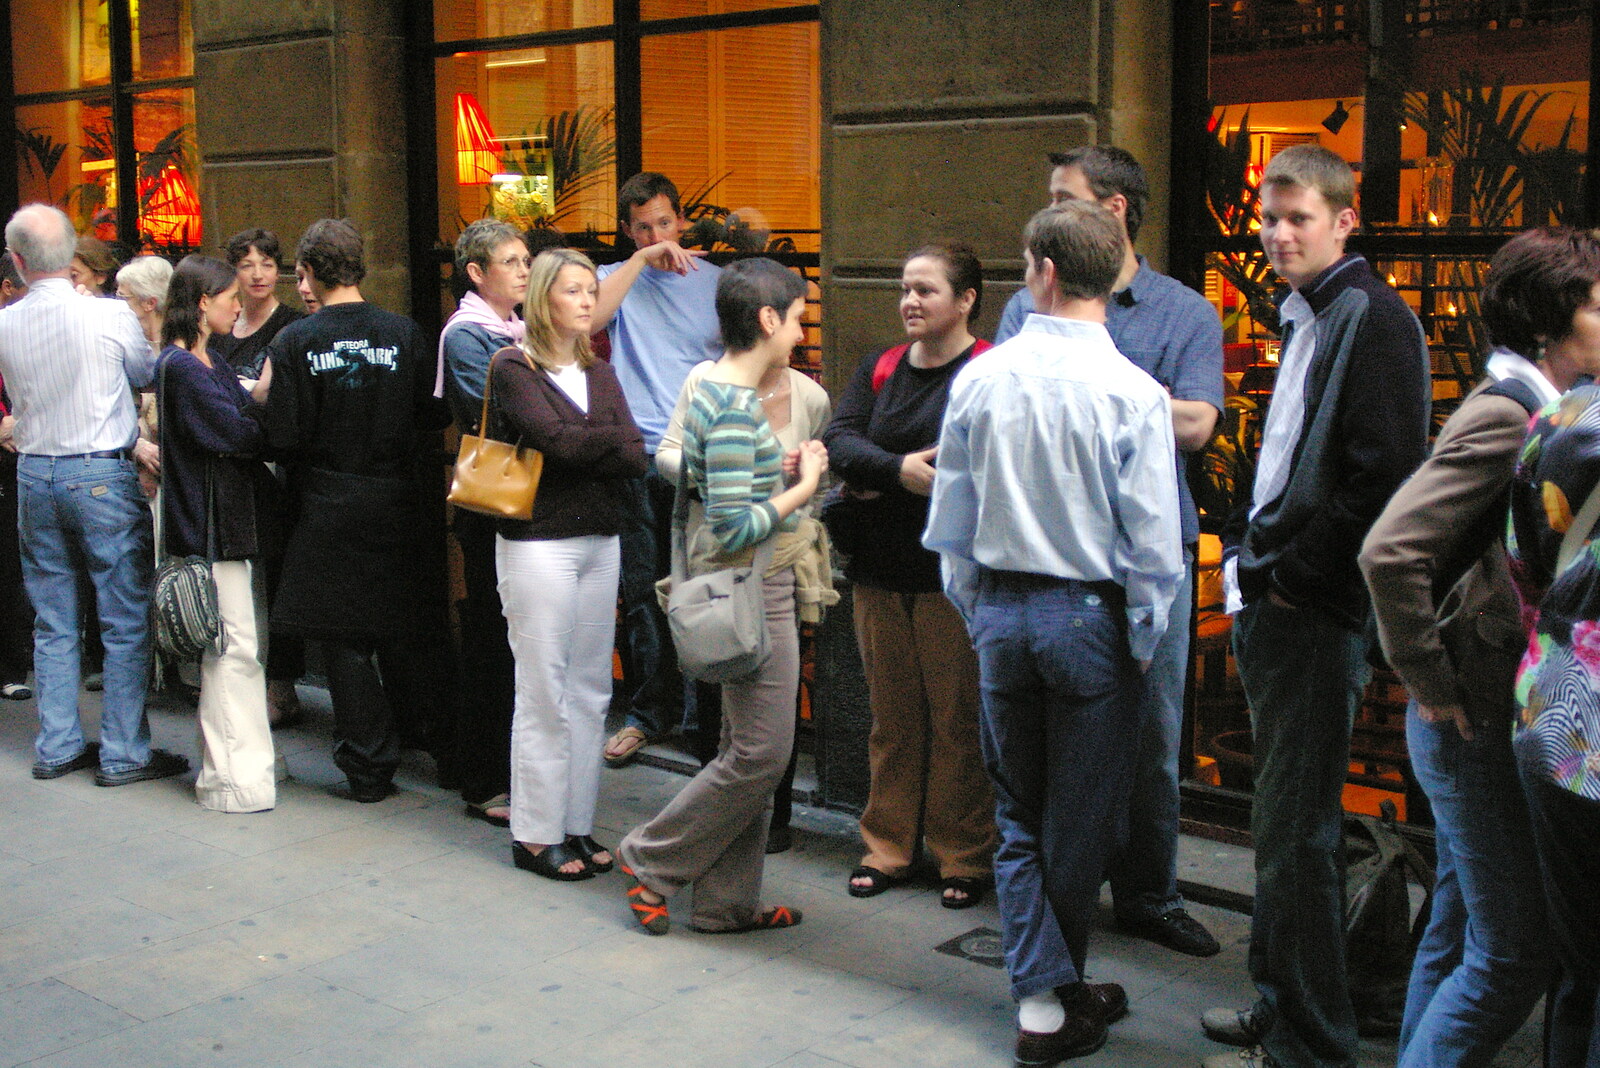 The boys are in a queue for a restaurant from A Trip to Barcelona, Catalunya, Spain - 29th April 2005